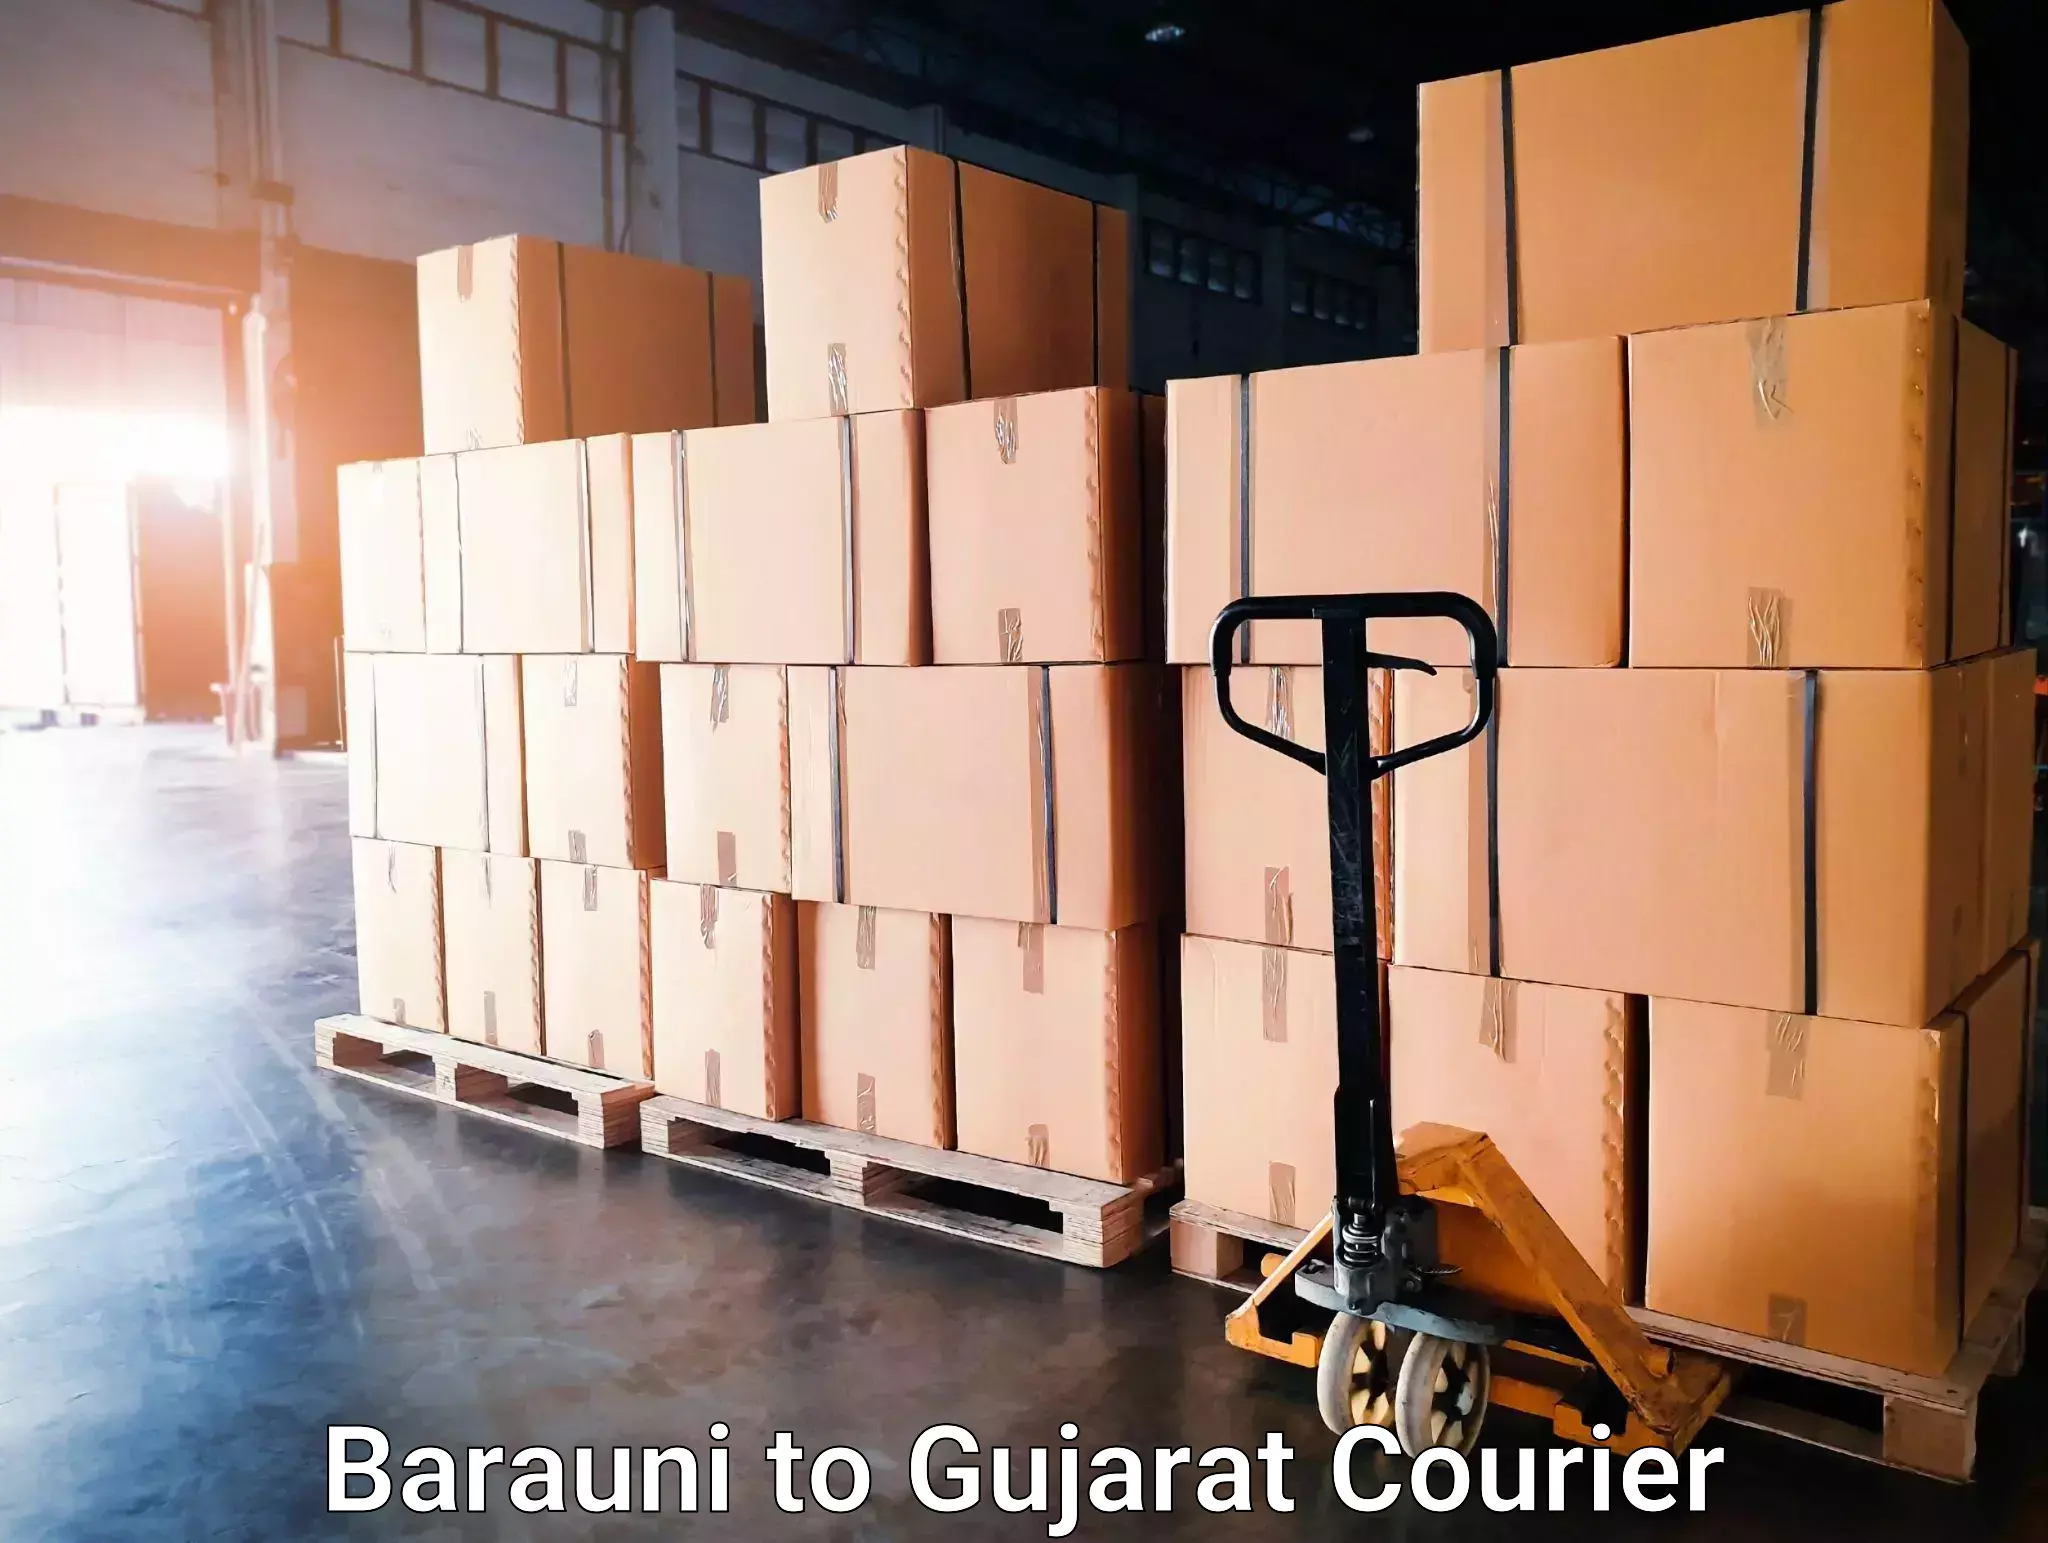 Trusted relocation experts Barauni to Gujarat